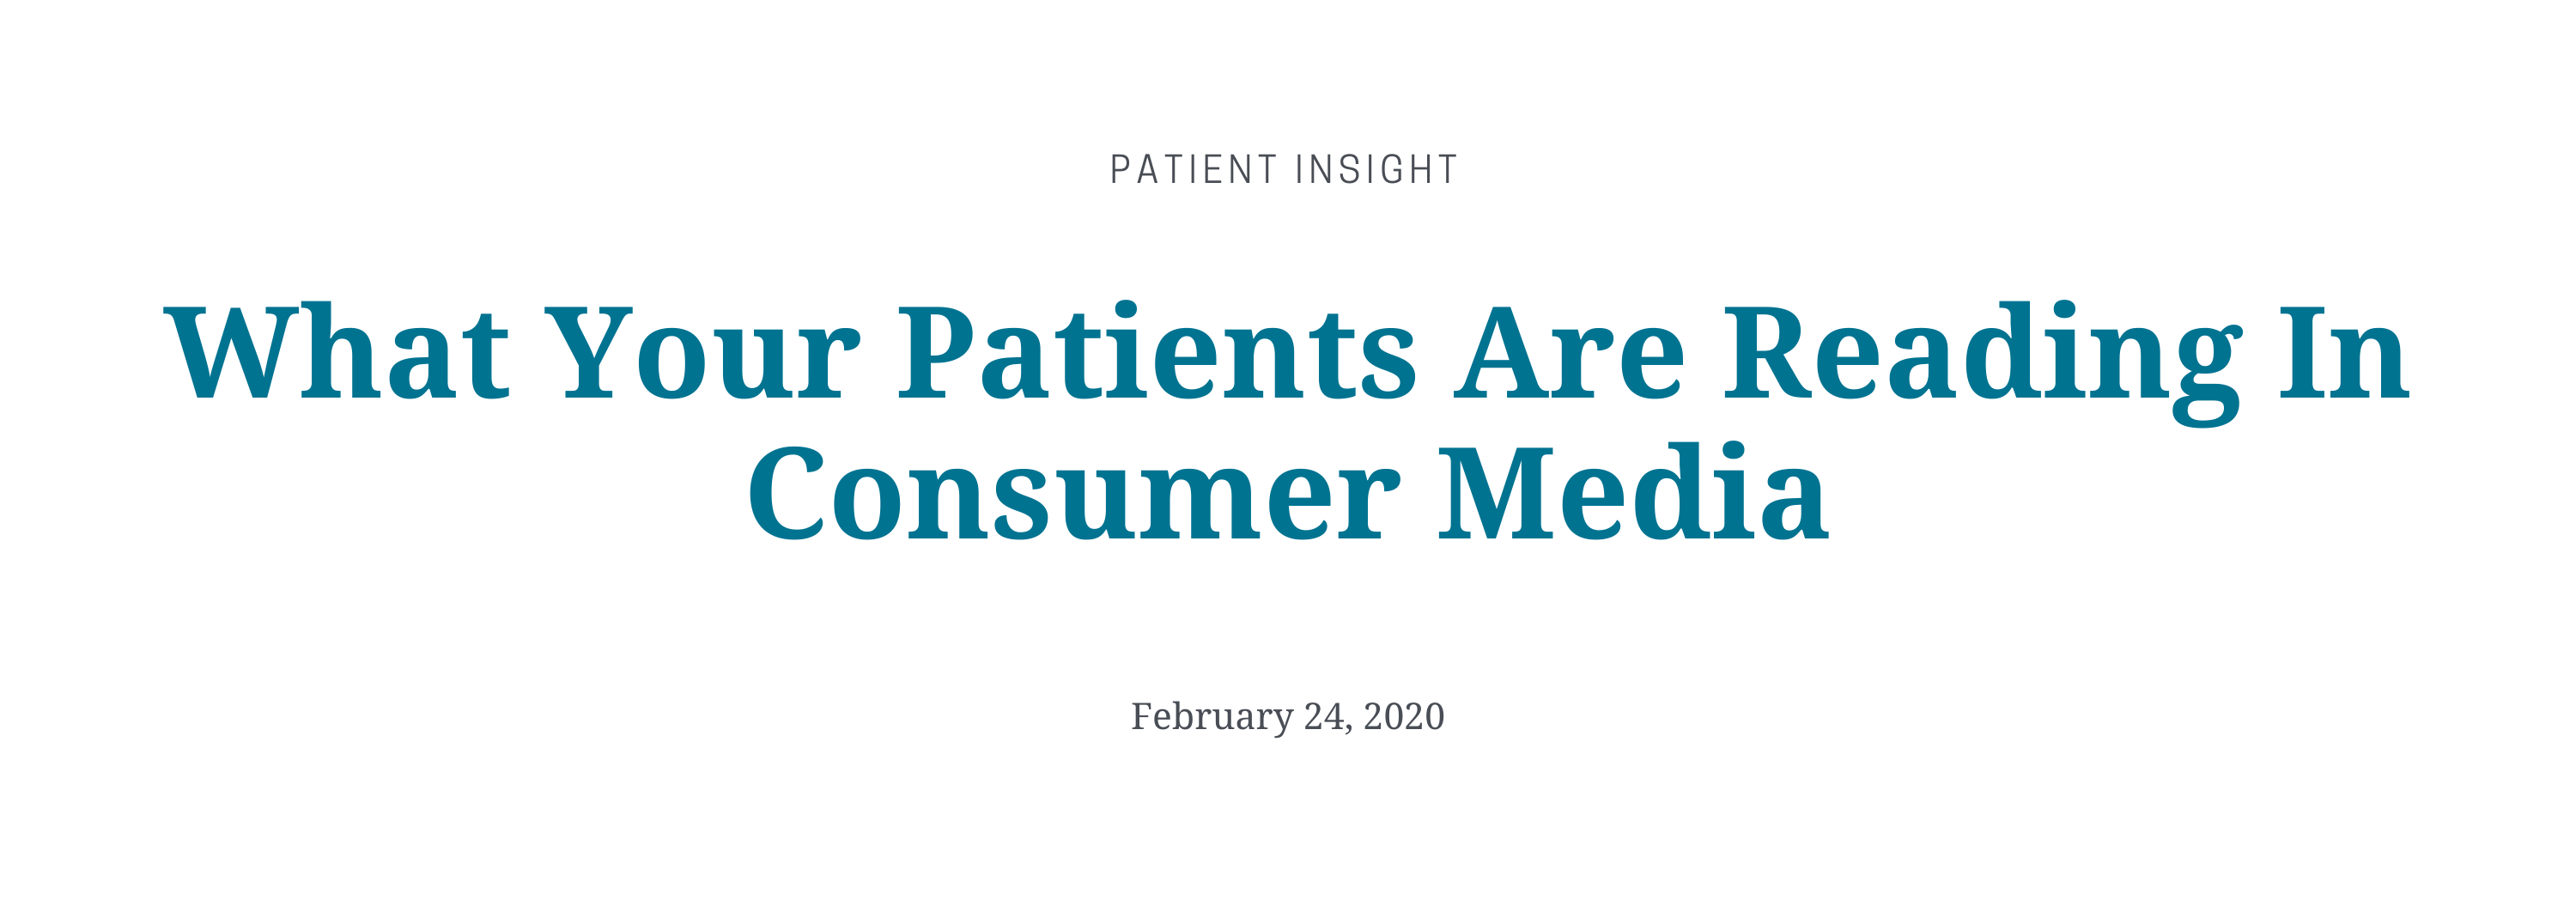 Patient Insight Feb. 24: What Your Patients Are Reading In Consumer Media